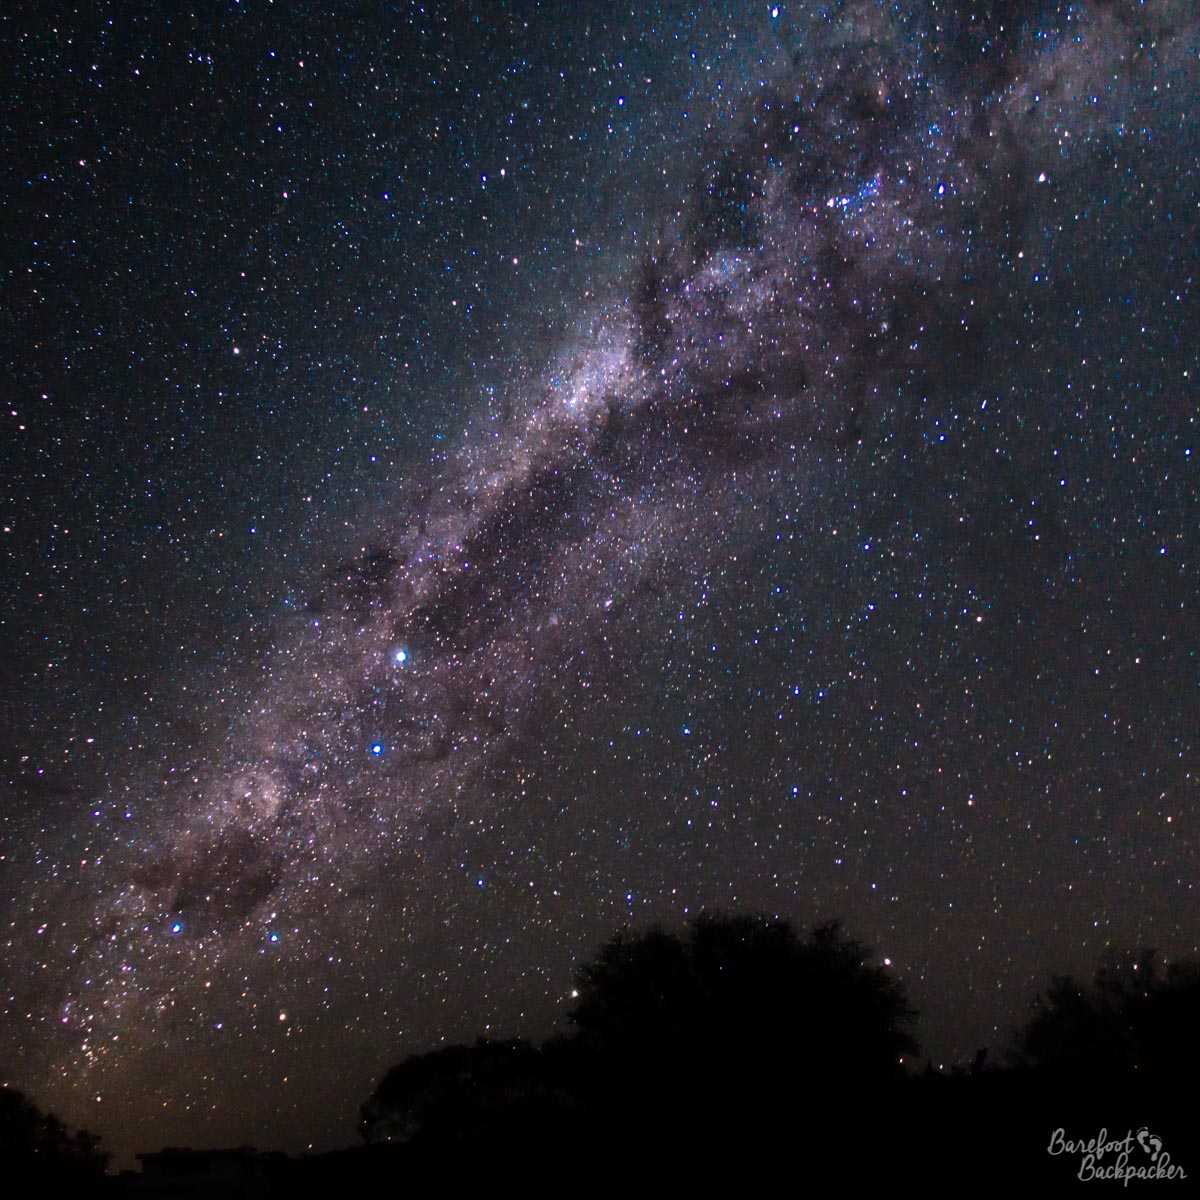 The night sky at Coalseam; a very clear view of the Milky Way.